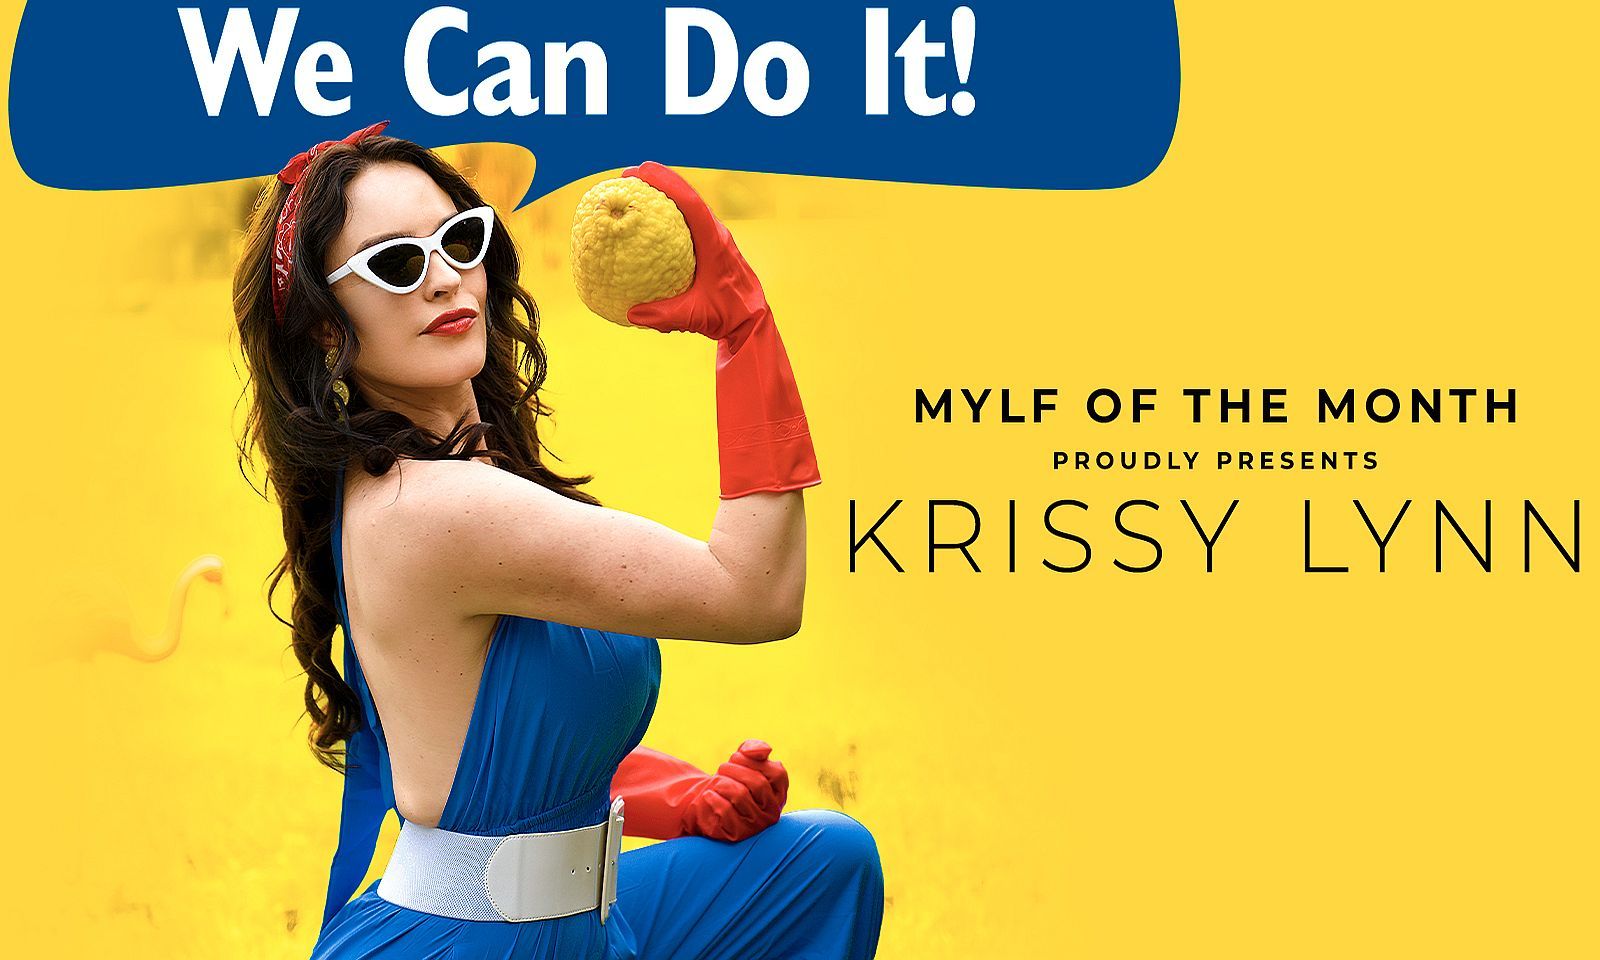 Krissy Lynn Celebrates Mother's Day All Day as MYLF of the Month